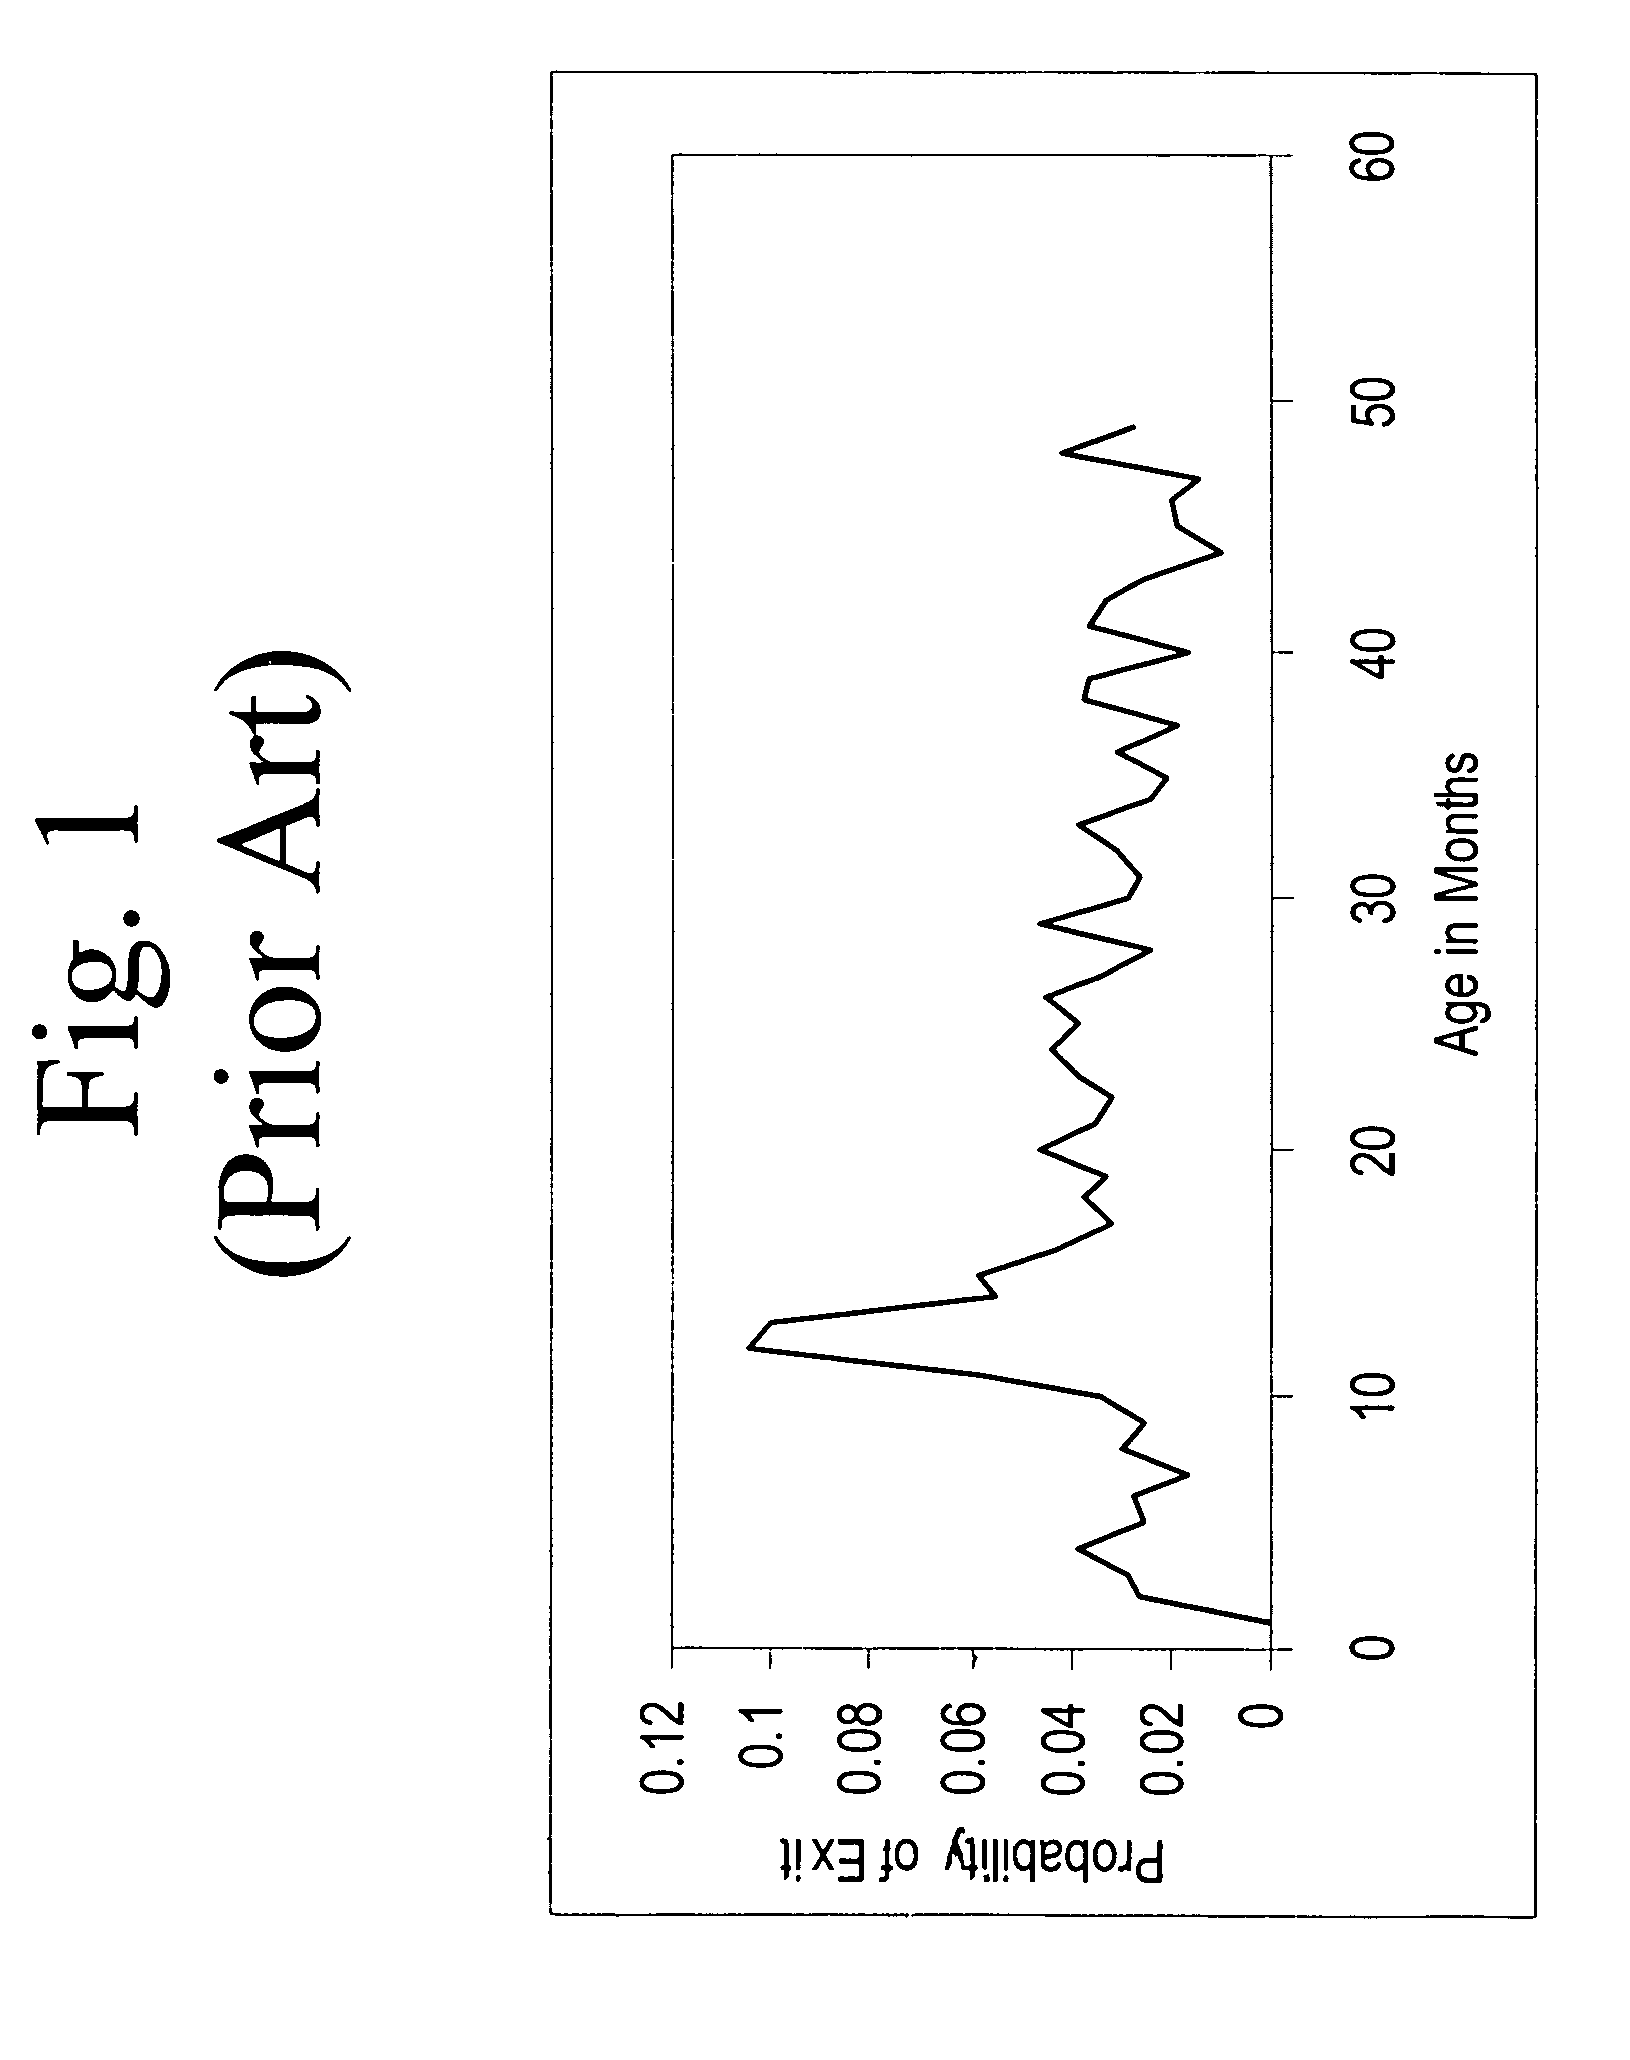 Method for evaluating customer valve to guide loyalty and retention programs